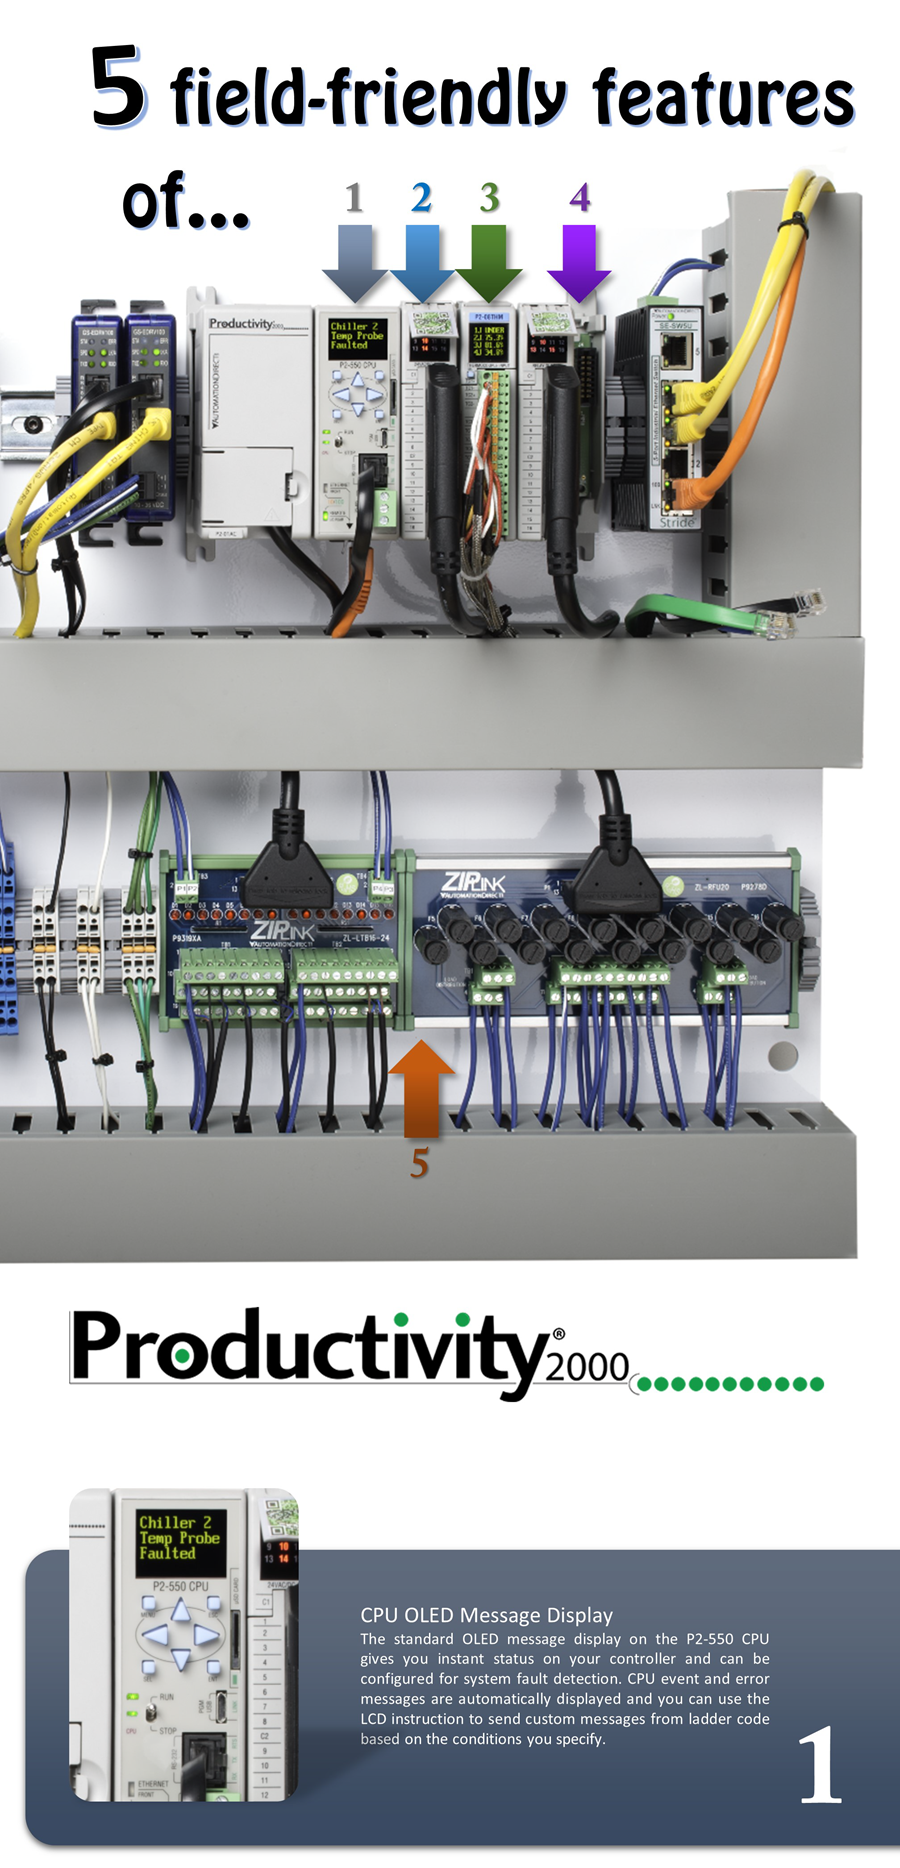 Field-Friendly Hardware Features of Productivity2000